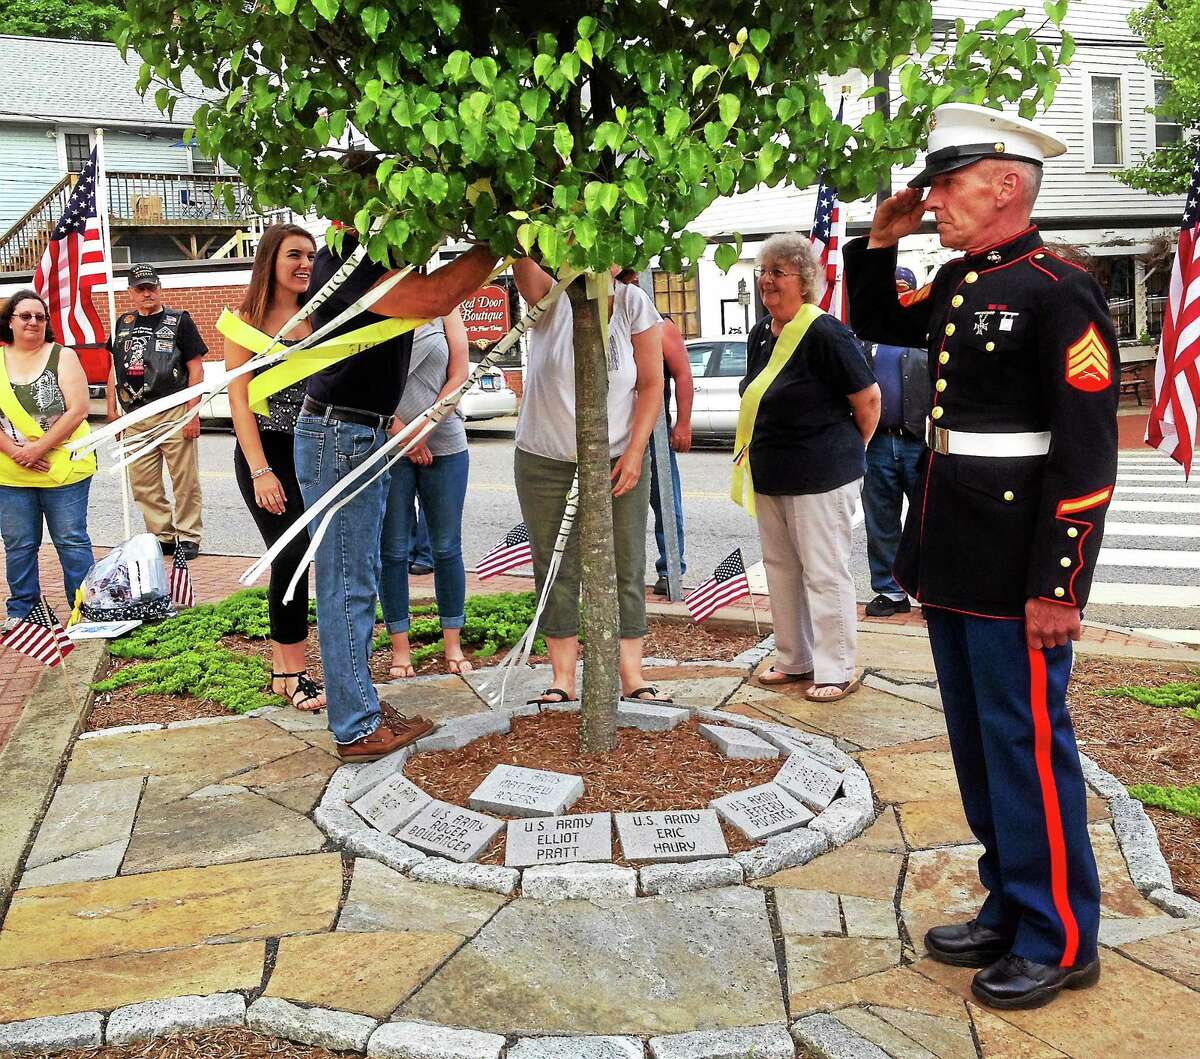 Jeff Mill - The Middletown Press From left are Megan, Caitlin, Susan and Jeff Beebe of East Hampton, the family of marine Jacob Beebe who was deployed to Afghanistan.